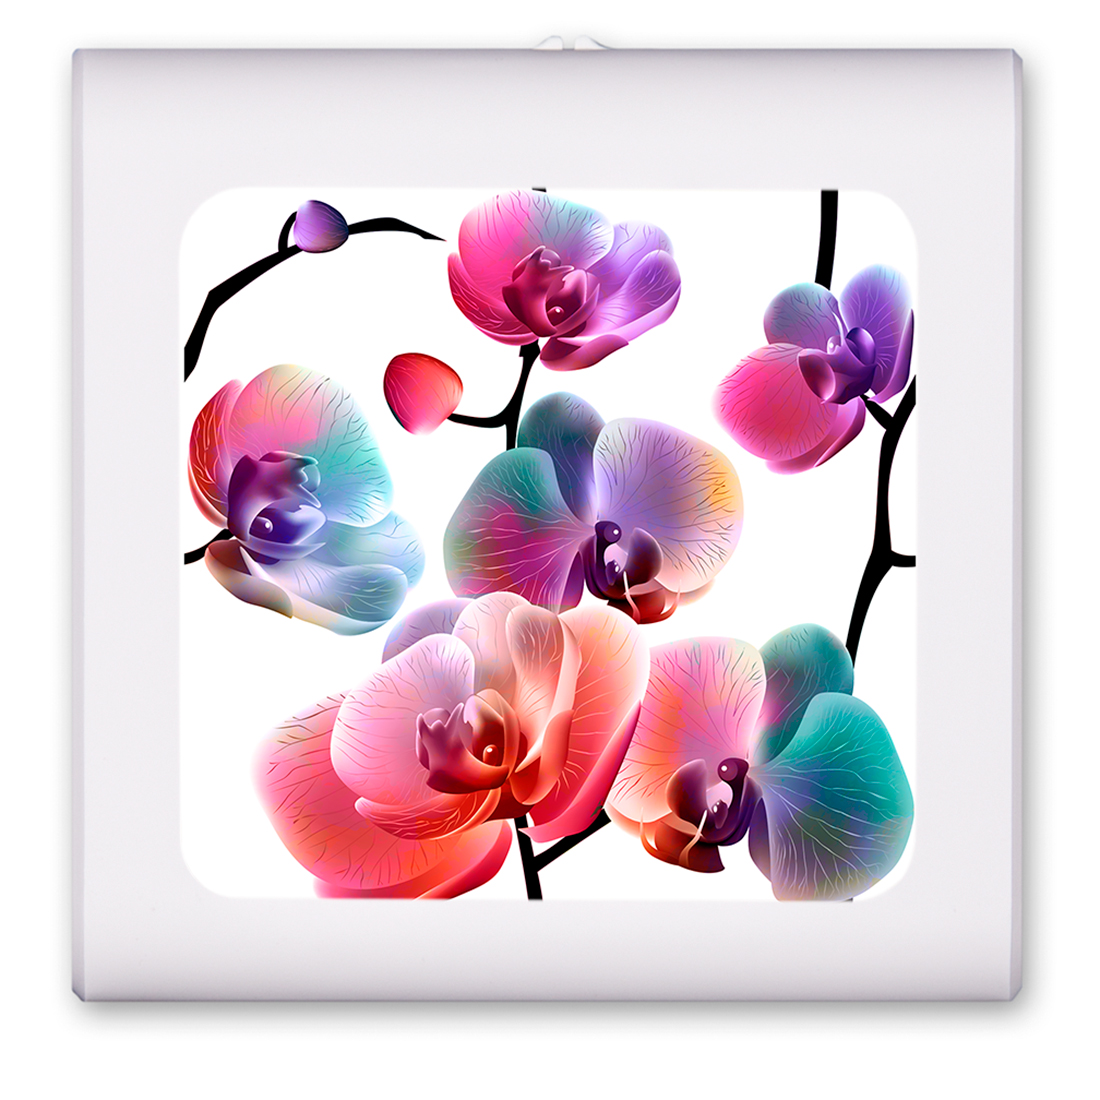 Colorful Graphic Floral Art - #2939